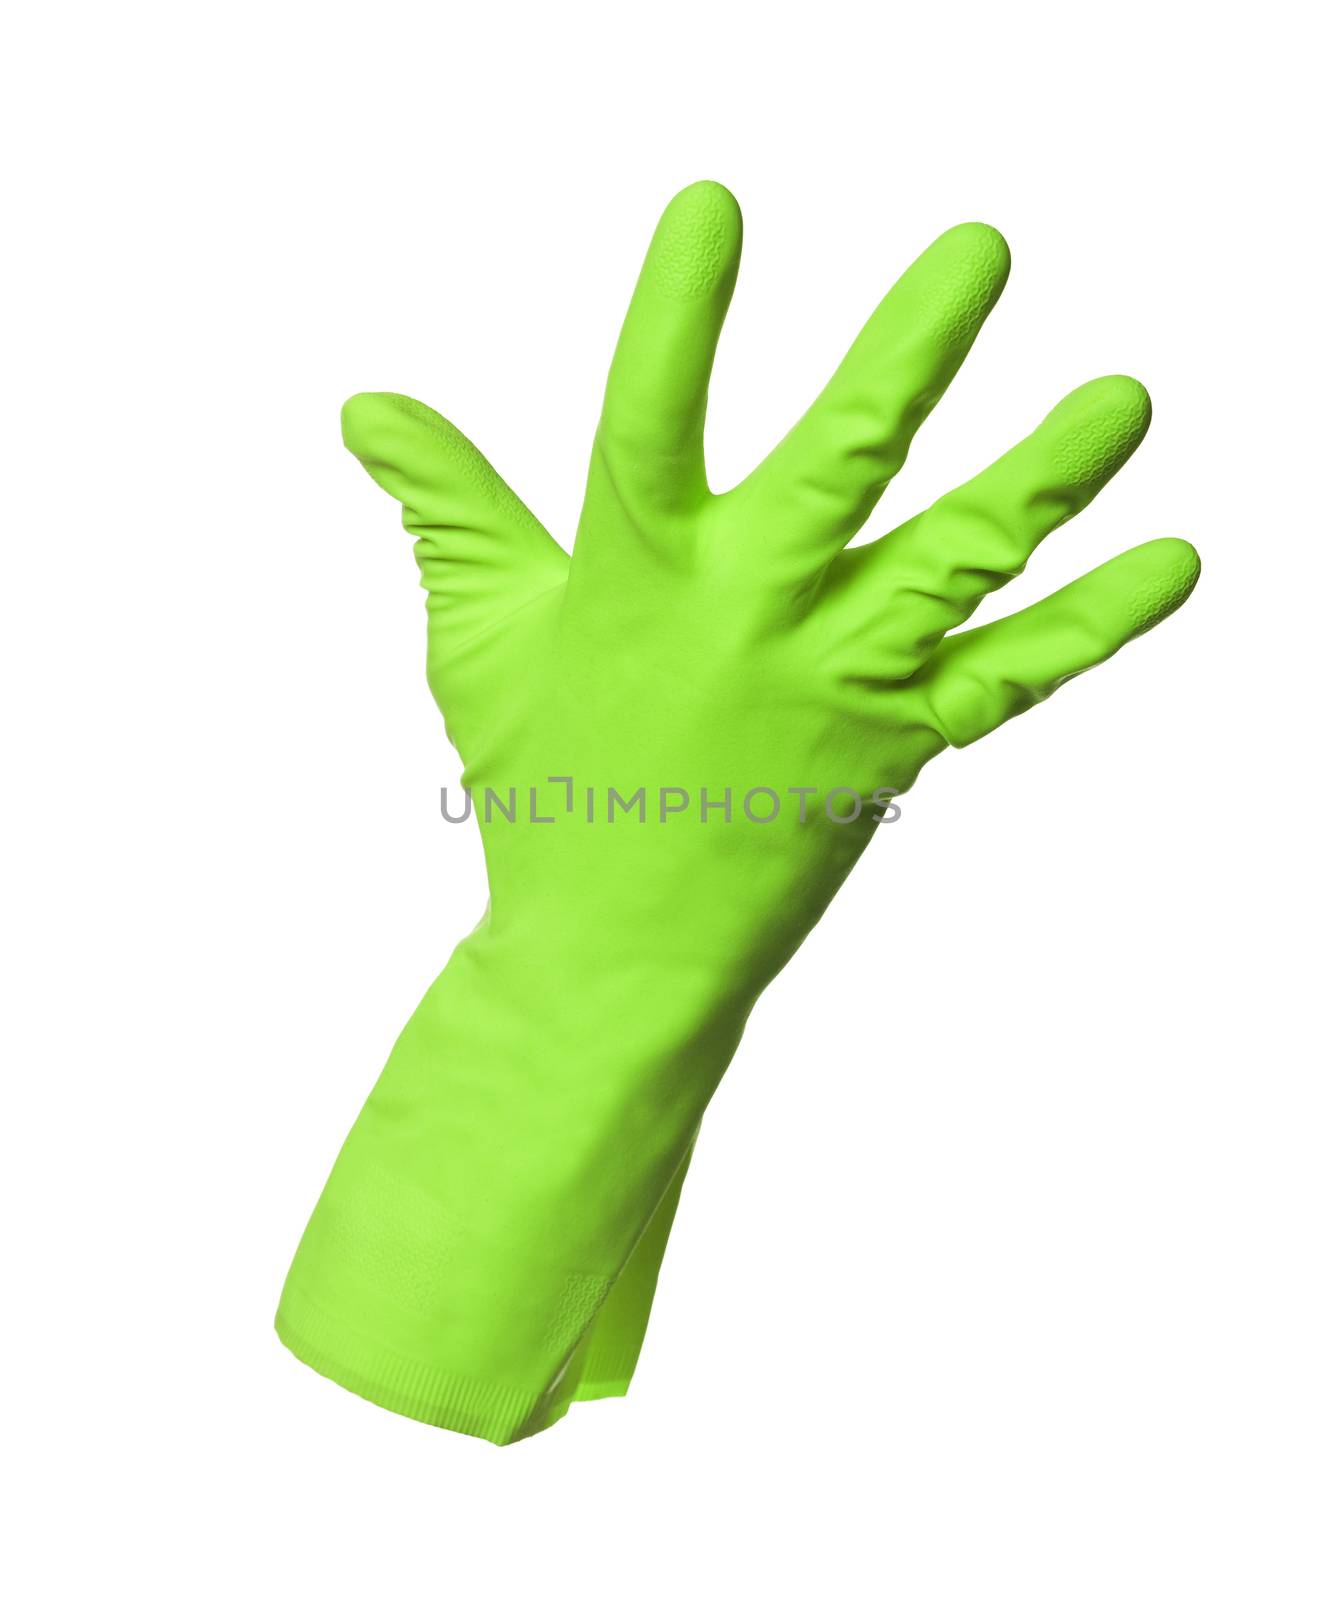 Green protection glove isolated on white background by gemenacom